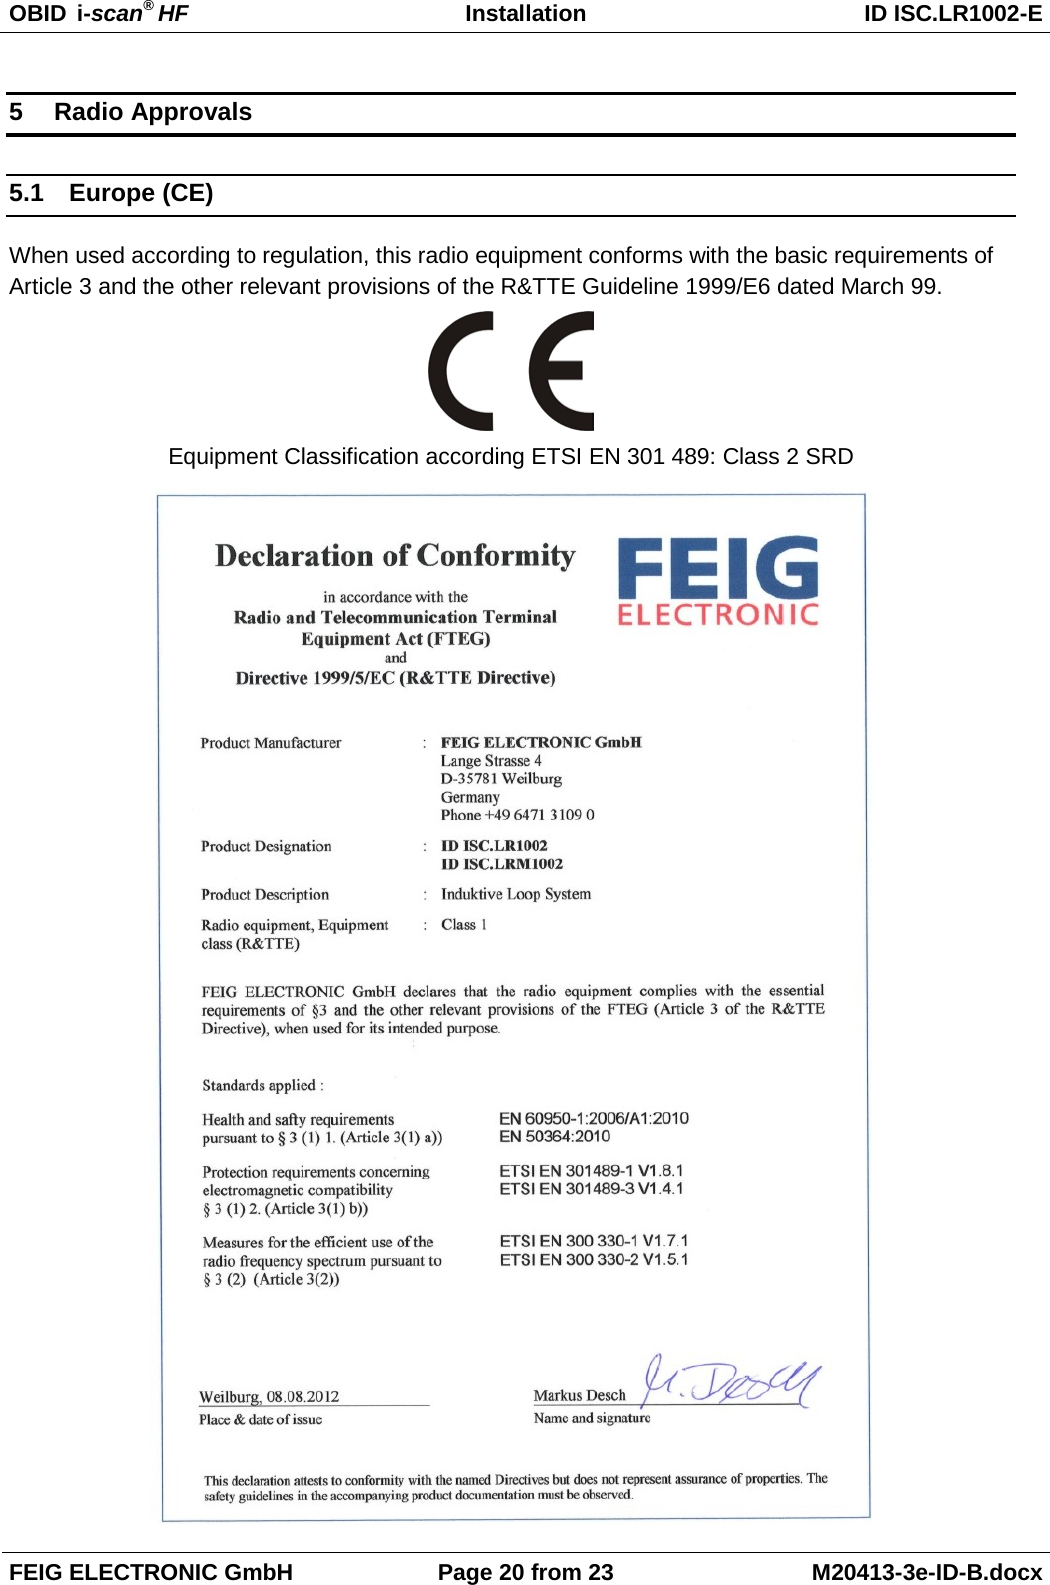 OBID  i-scan® HF Installation ID ISC.LR1002-E  FEIG ELECTRONIC GmbH Page 20 from 23 M20413-3e-ID-B.docx  5  Radio Approvals 5.1 Europe (CE) When used according to regulation, this radio equipment conforms with the basic requirements of Article 3 and the other relevant provisions of the R&amp;TTE Guideline 1999/E6 dated March 99.  Equipment Classification according ETSI EN 301 489: Class 2 SRD  